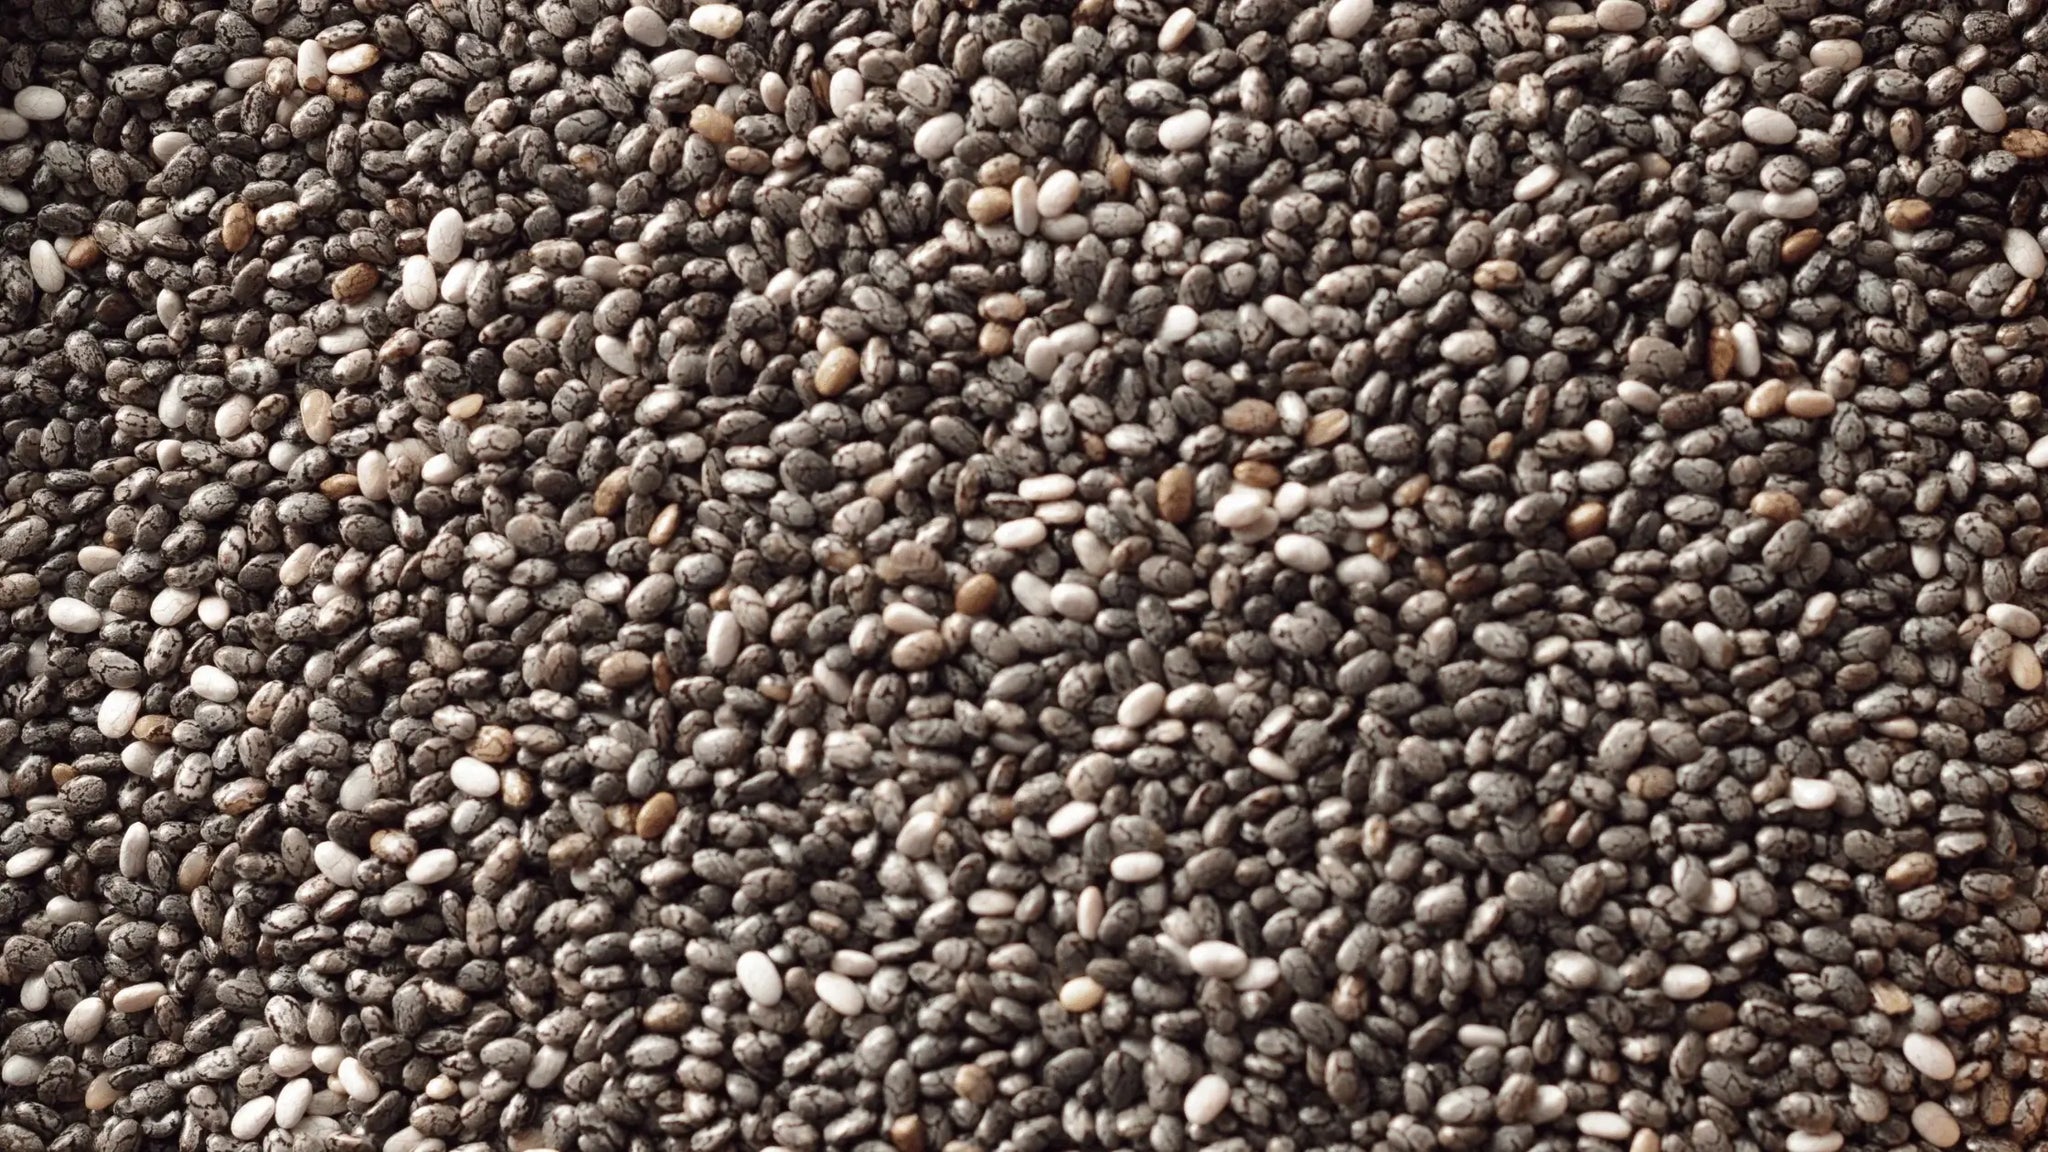 Resist Bars Chia Seeds and their versatile properties for health, protein, fiber, antioxidants